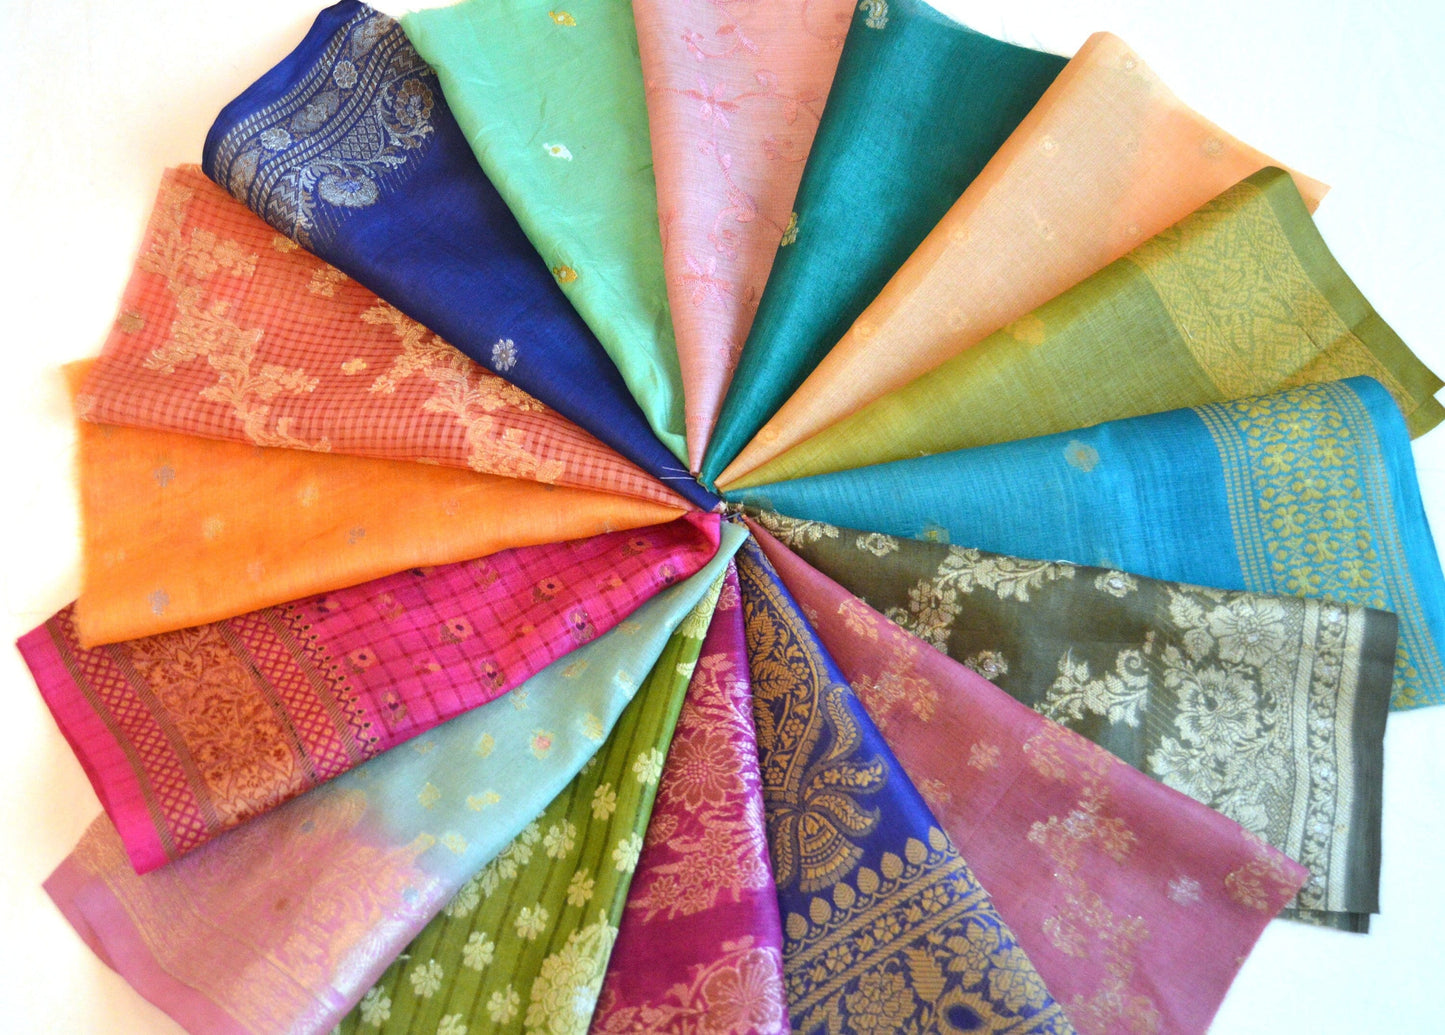 8 Inch x 16 Pieces Mixed Colour Upcycled Sari Silk Craft Fabric Card Making Collage Mixed Media Textile Art Sewing Junk Journals